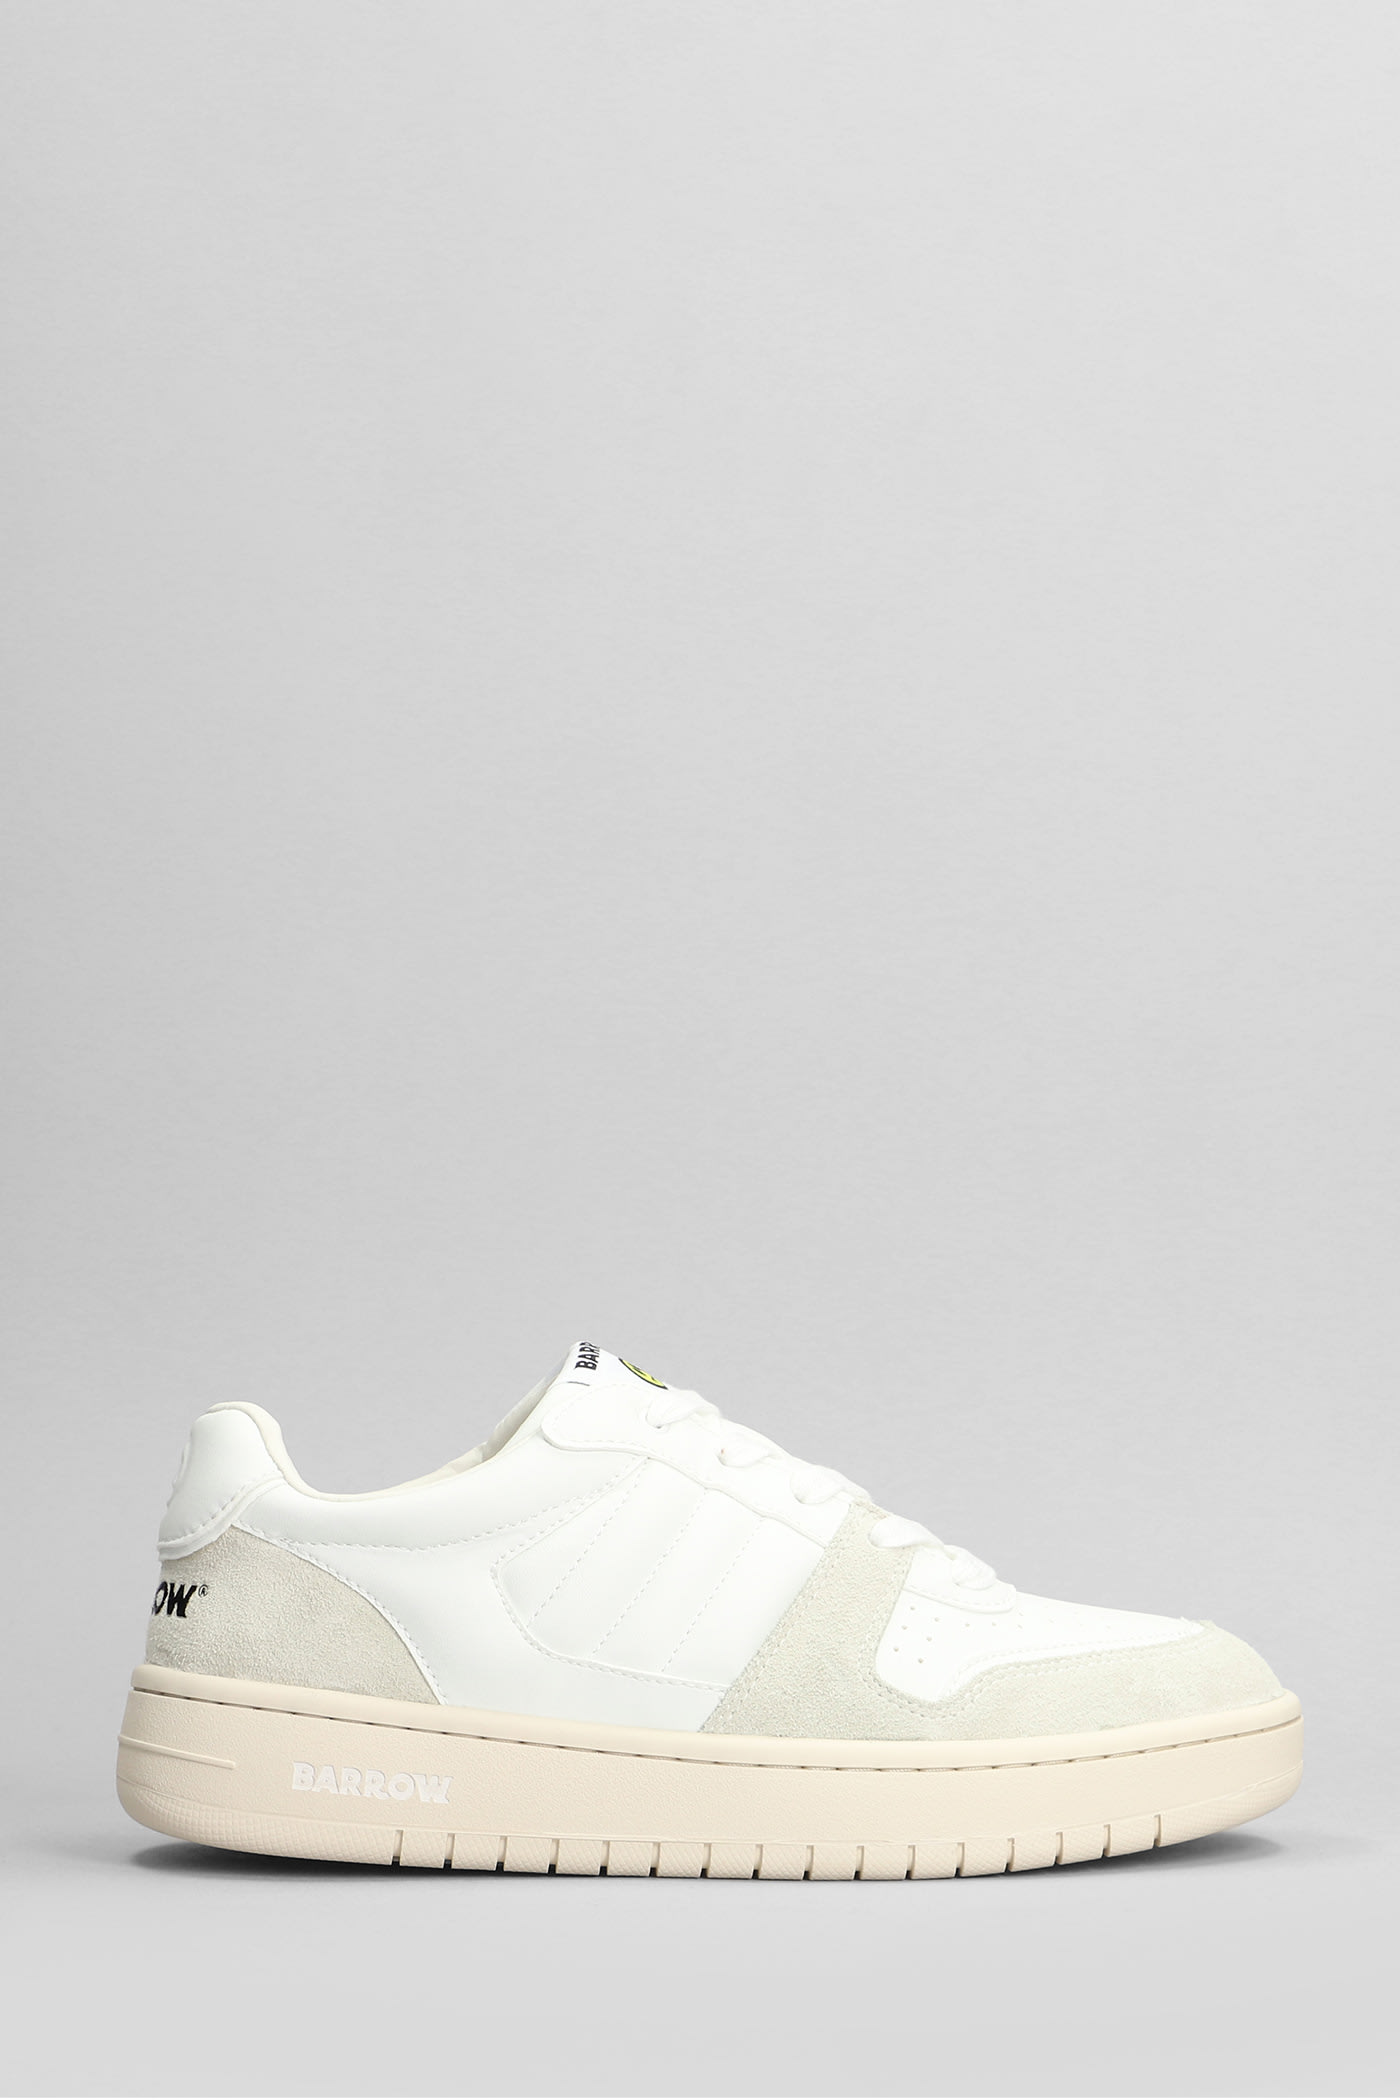 Barrow Sneakers In White Suede And Leather